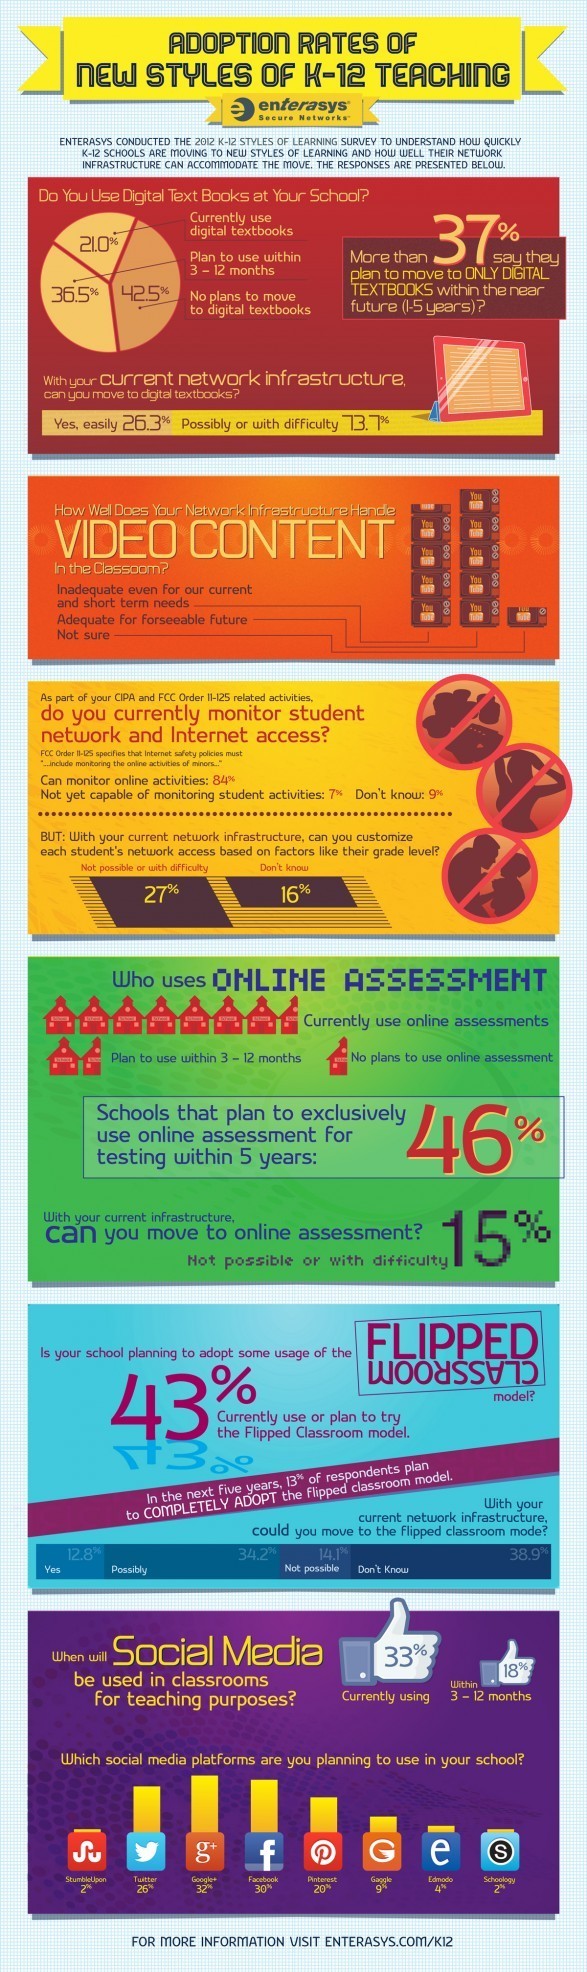 Adoption Rates of New Styles of K-12 Teaching infographic